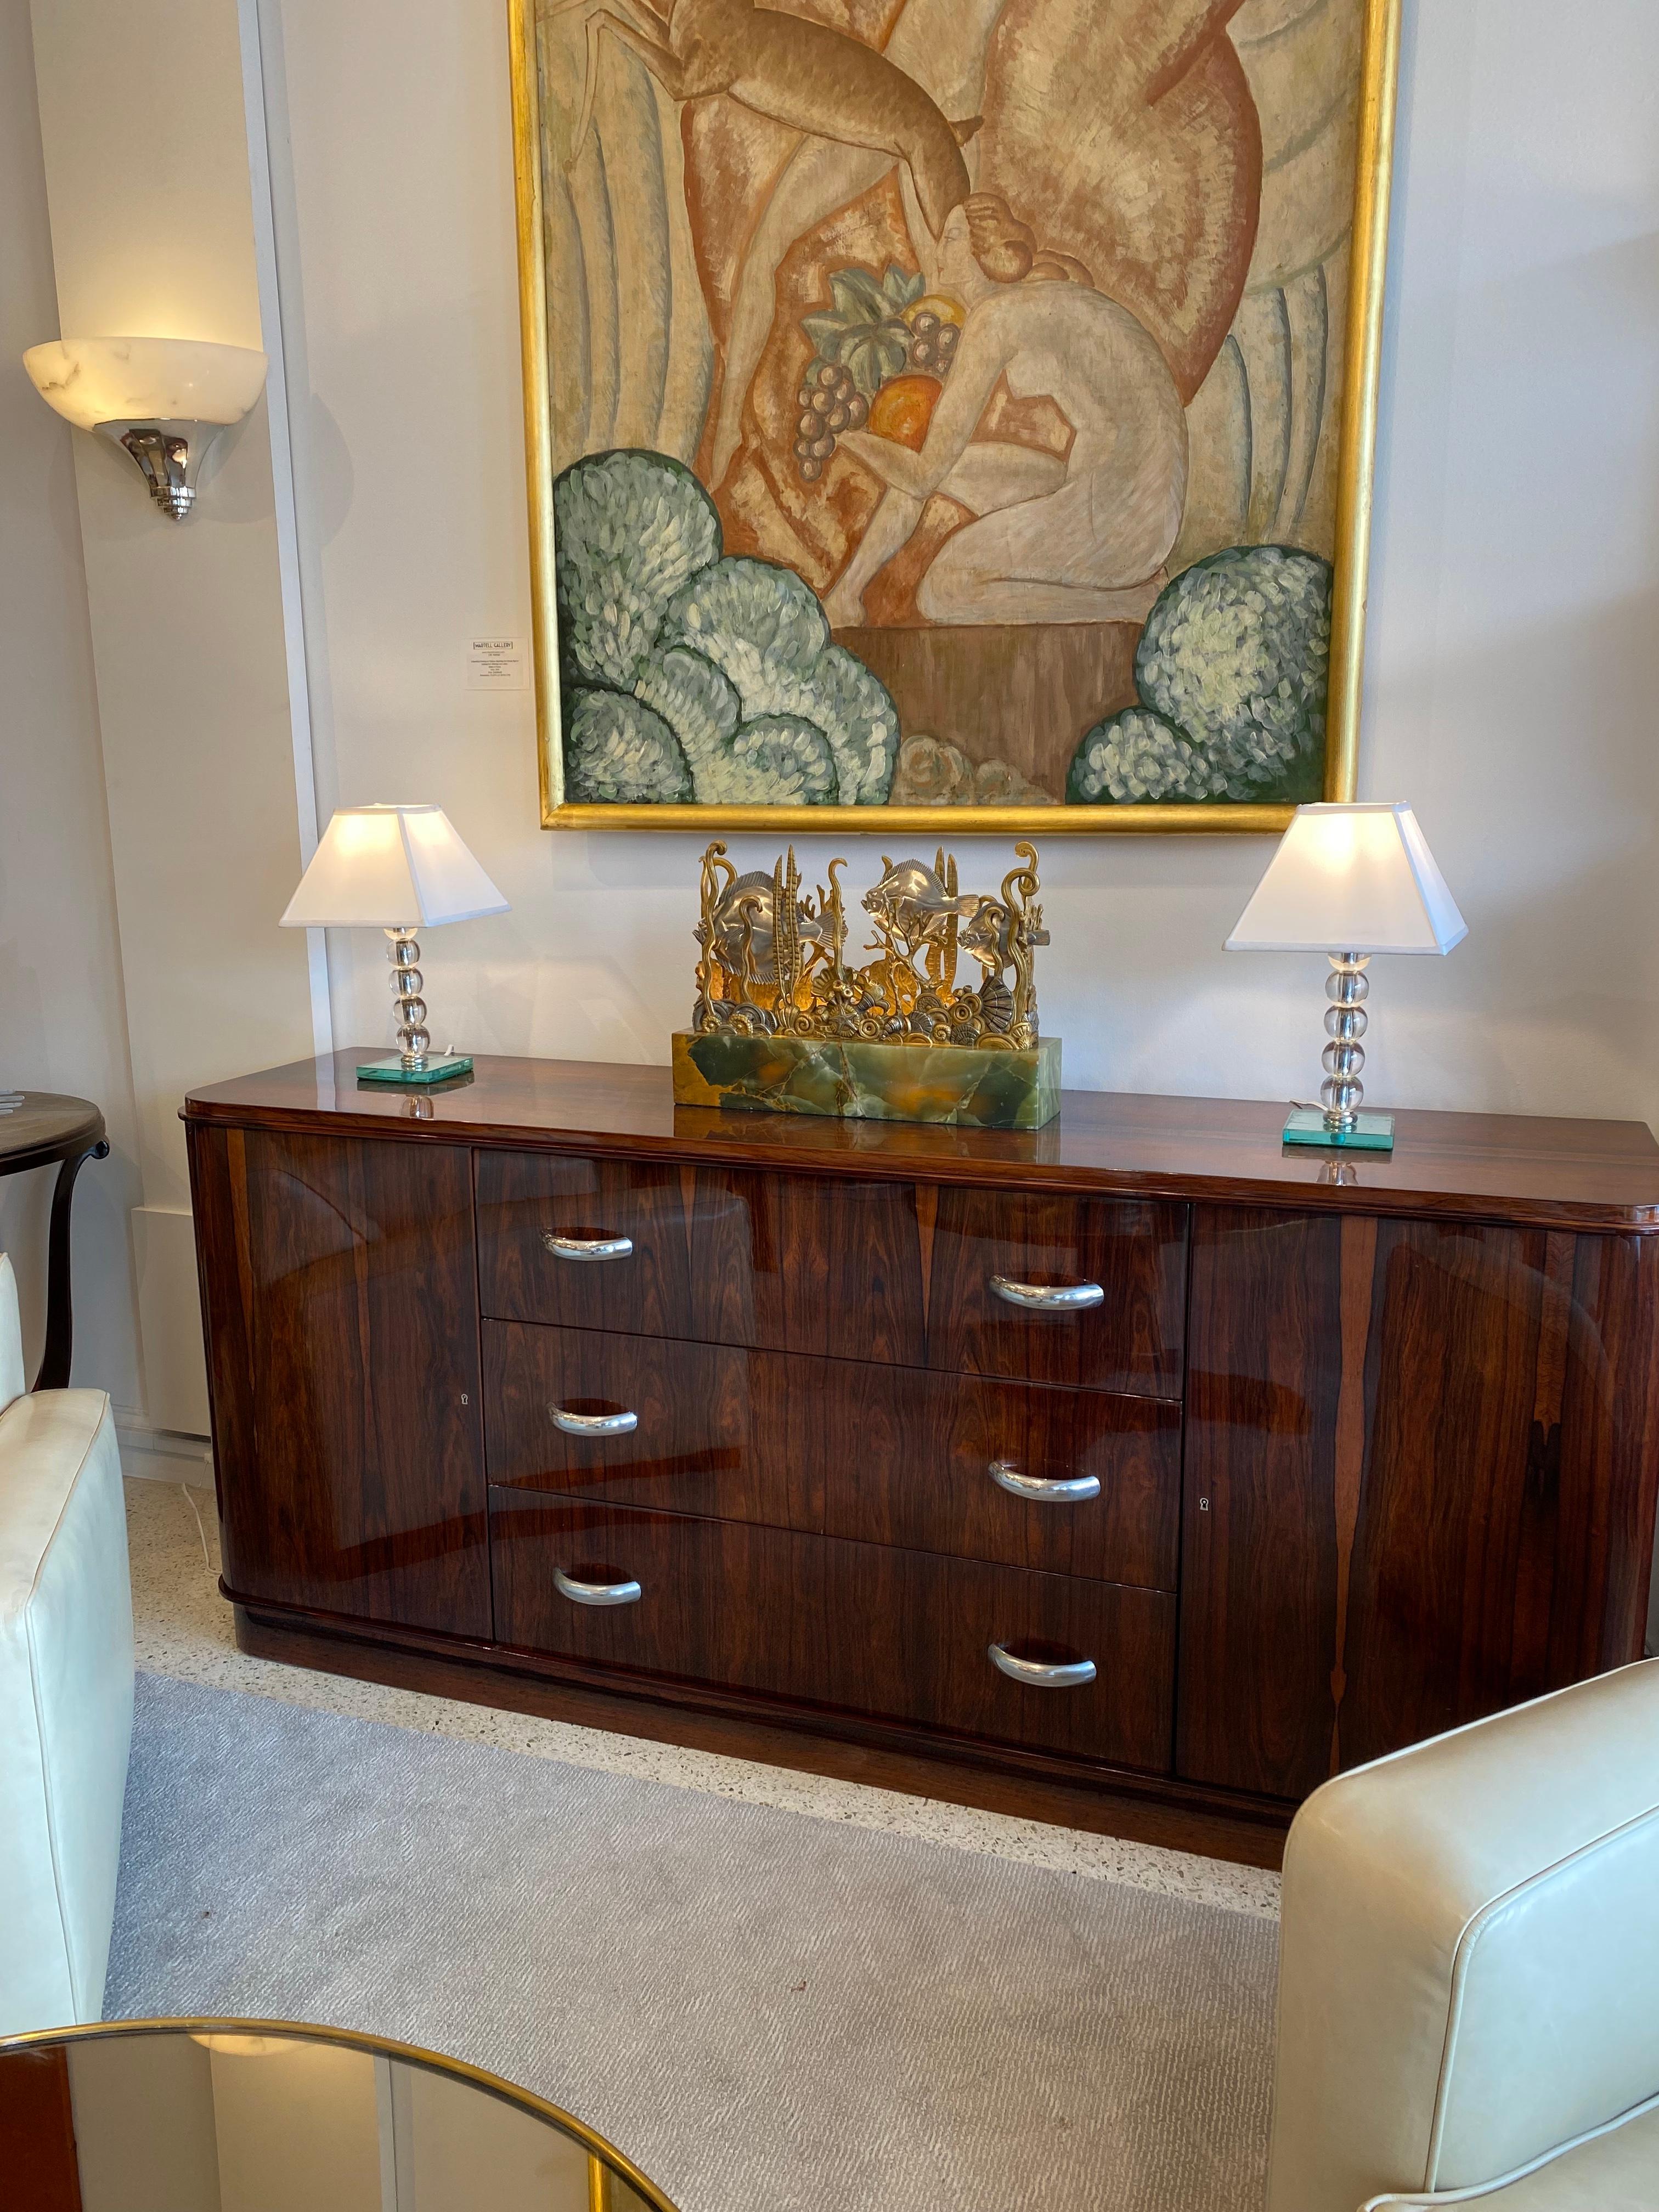 An Elegant Art Deco Rosewood buffet/sideboard with three drawers in the center with nickel handles and 2 doors on each side with shelves inside designed by Jacques Adnet.

Jacques Adnet was an iconic Art Deco French designer. His designs featured